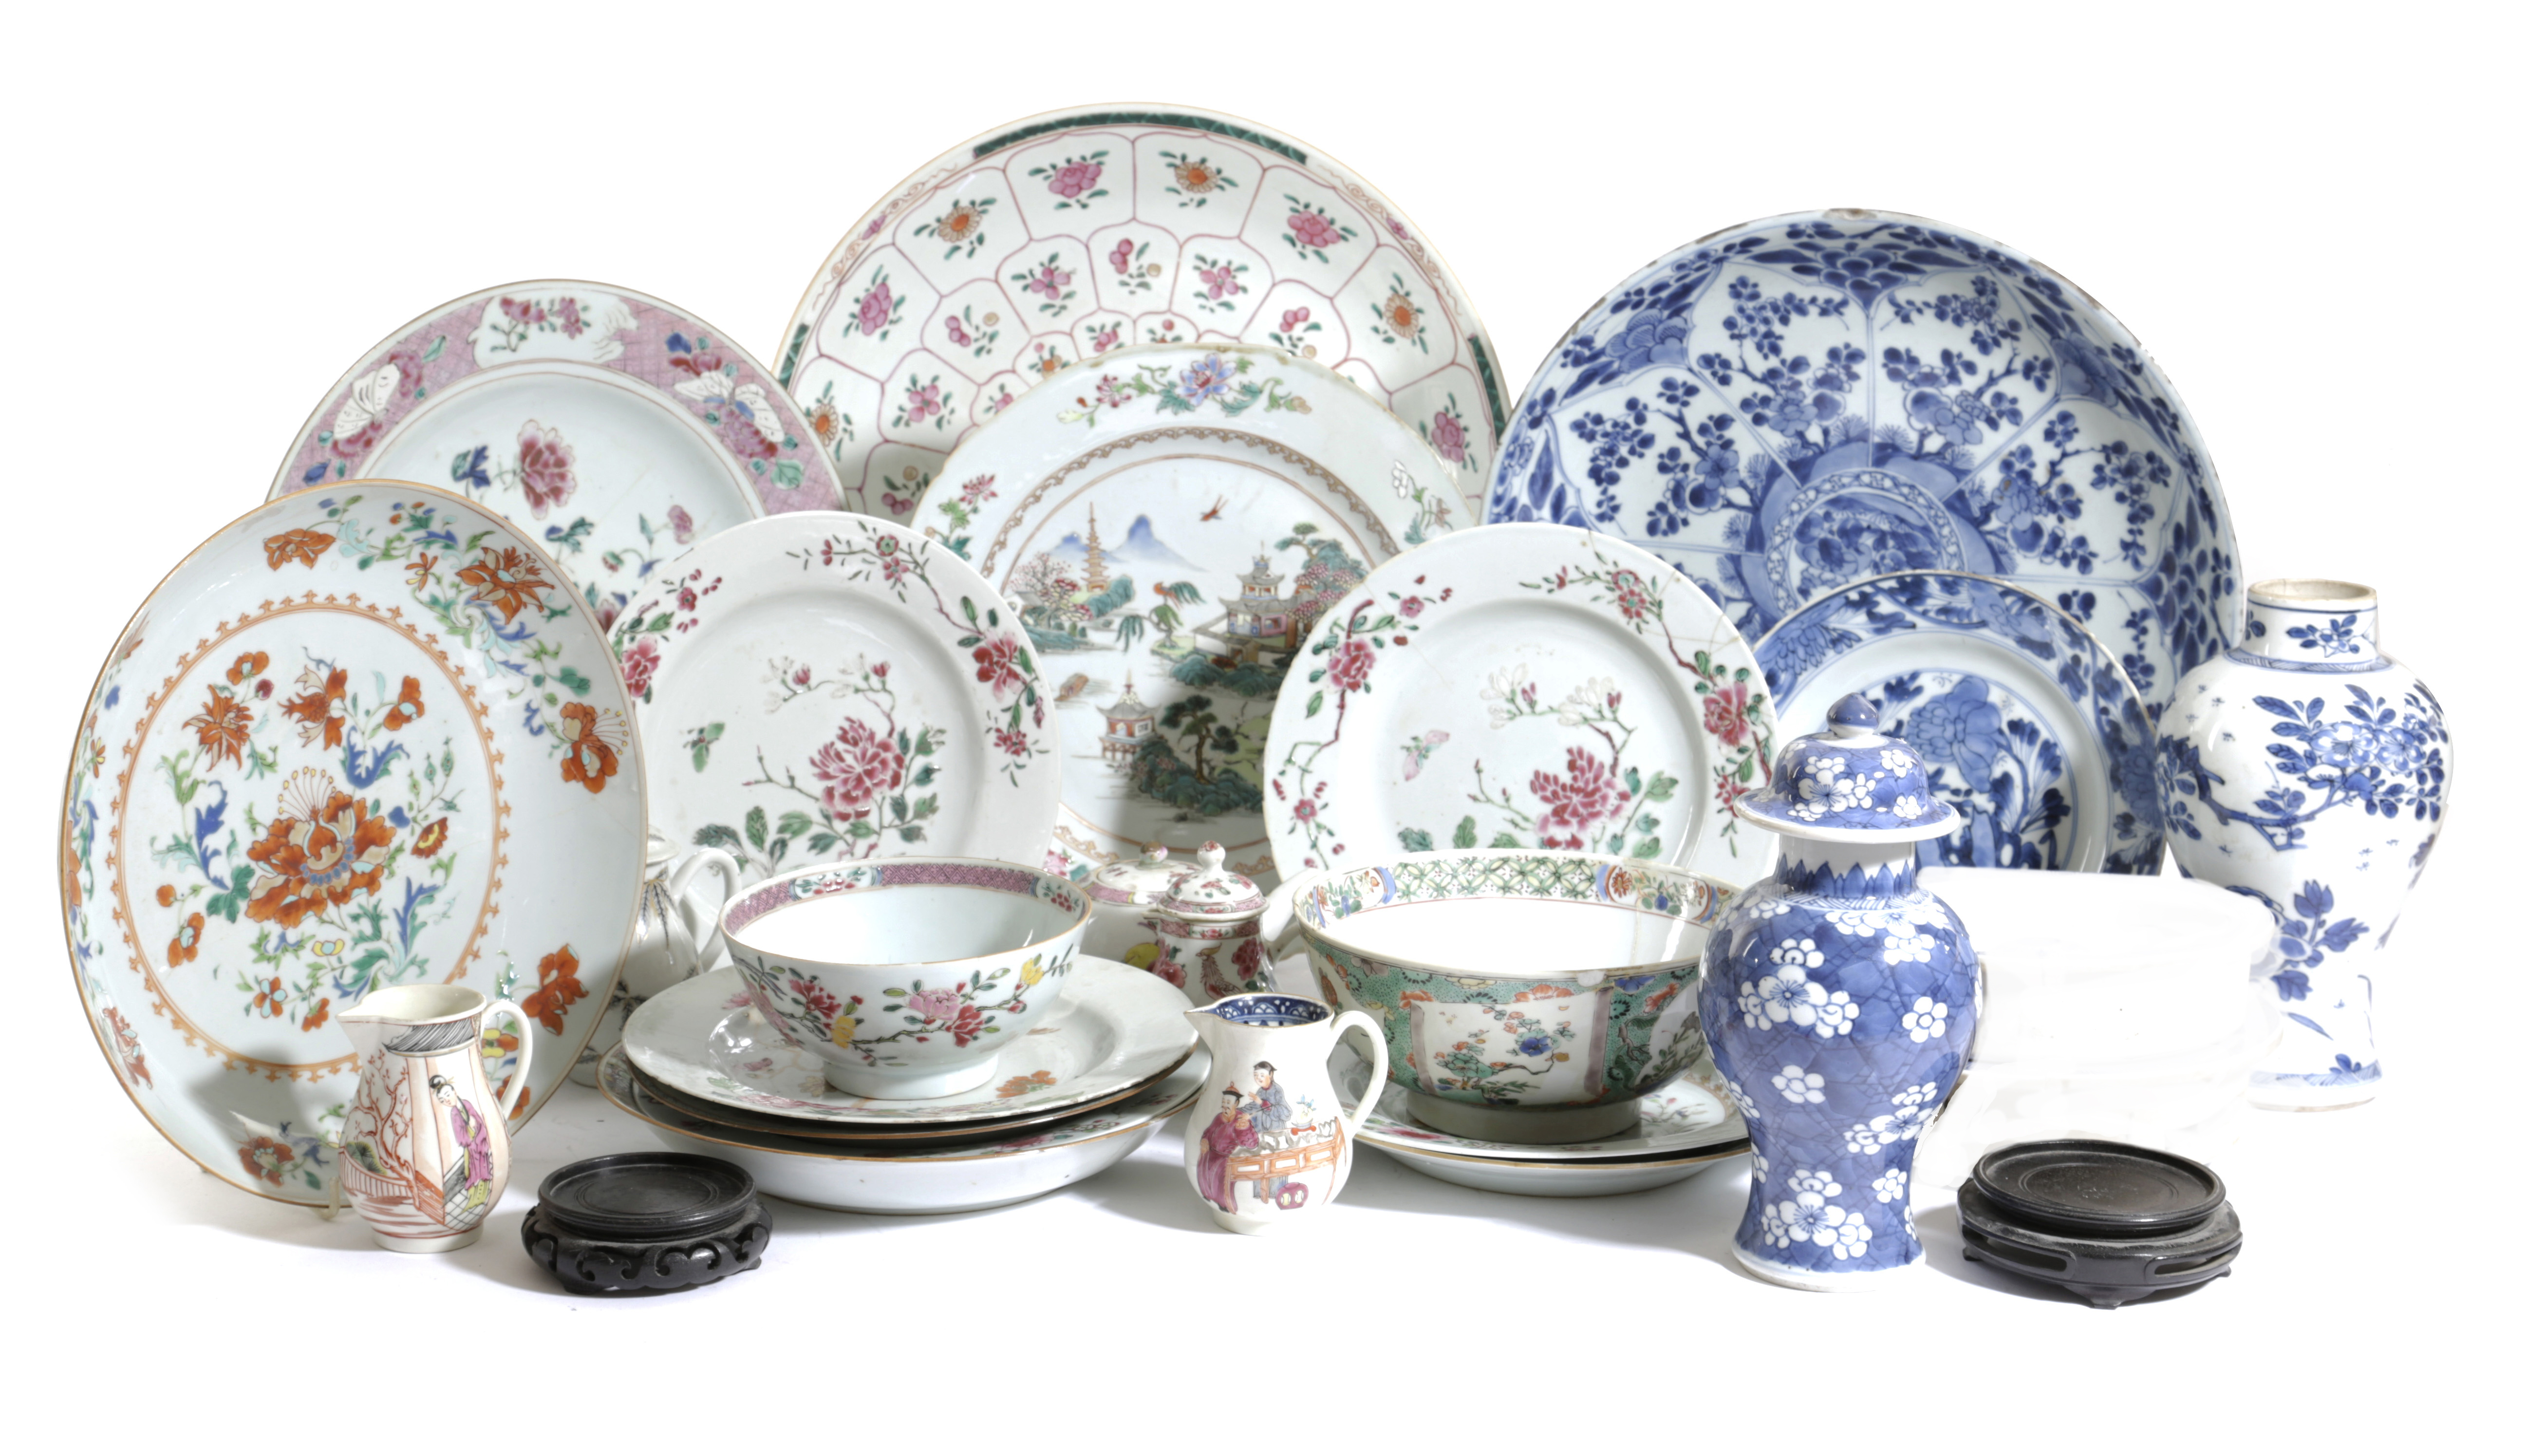 A COLLECTION OF CHINESE EXPORT PORCELAIN 19TH CENTURY including: famille rose chargers, plates, a